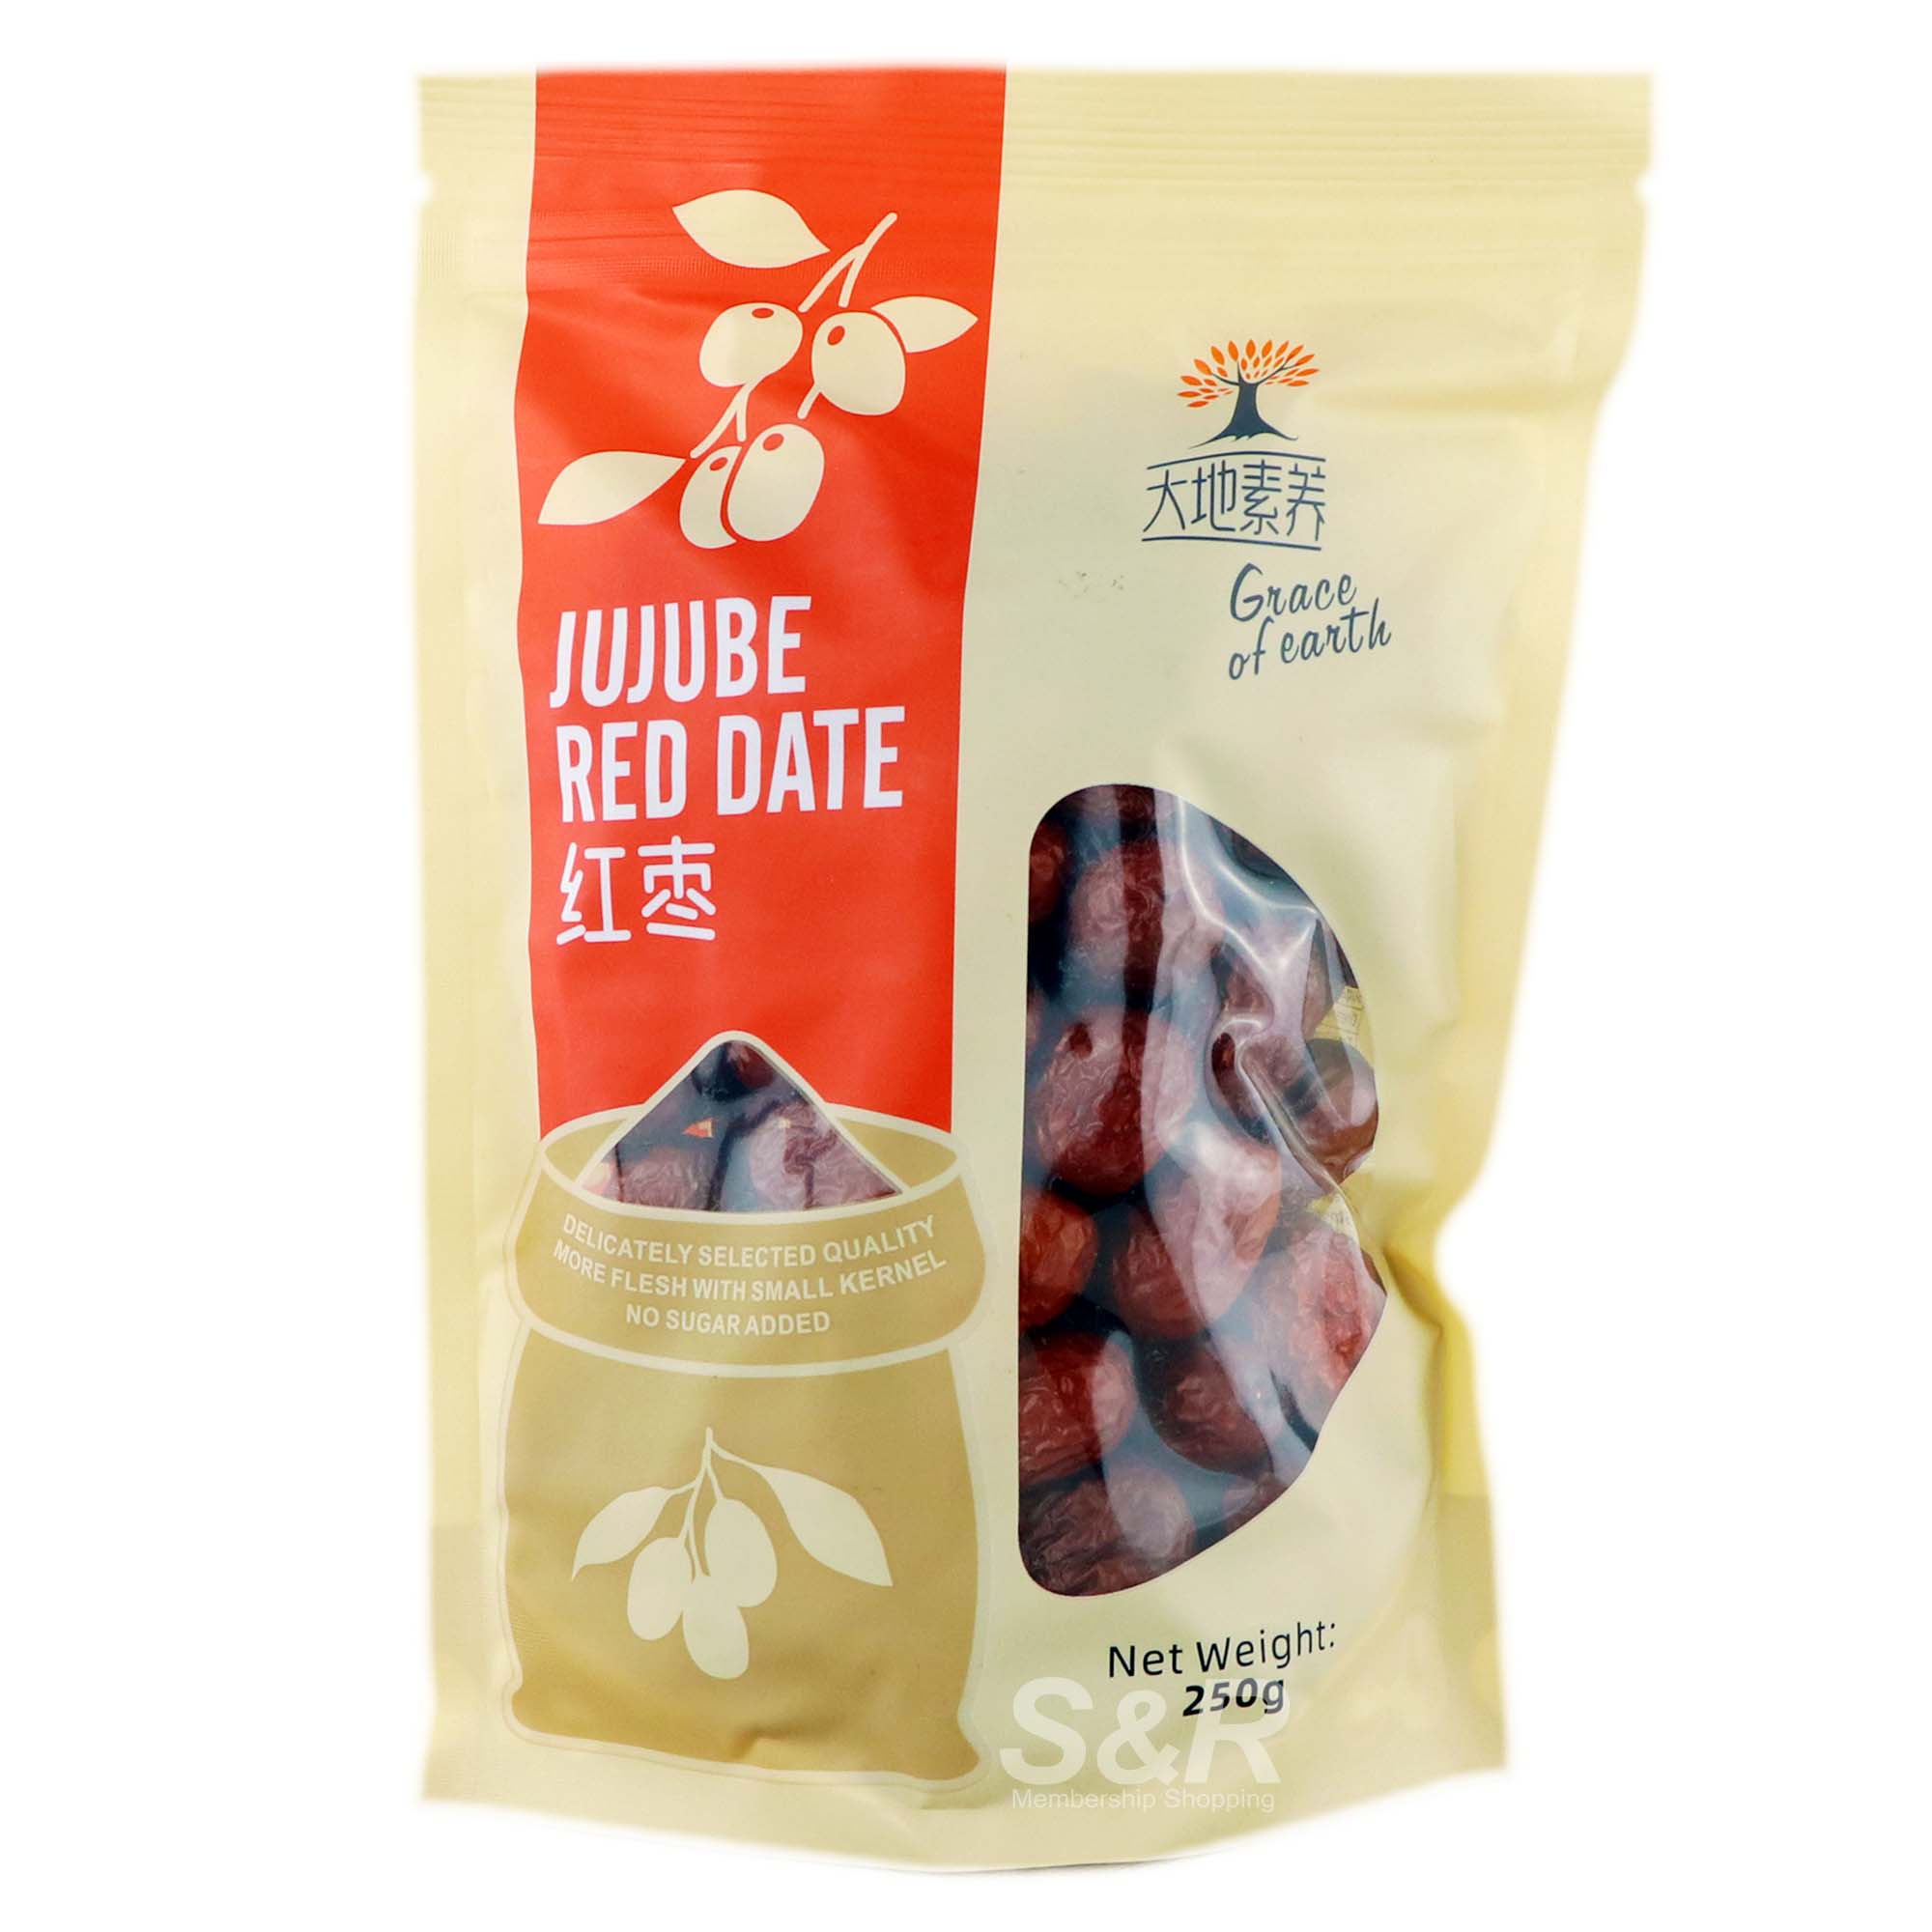 Grace of Earth Jujube Red Date 250g